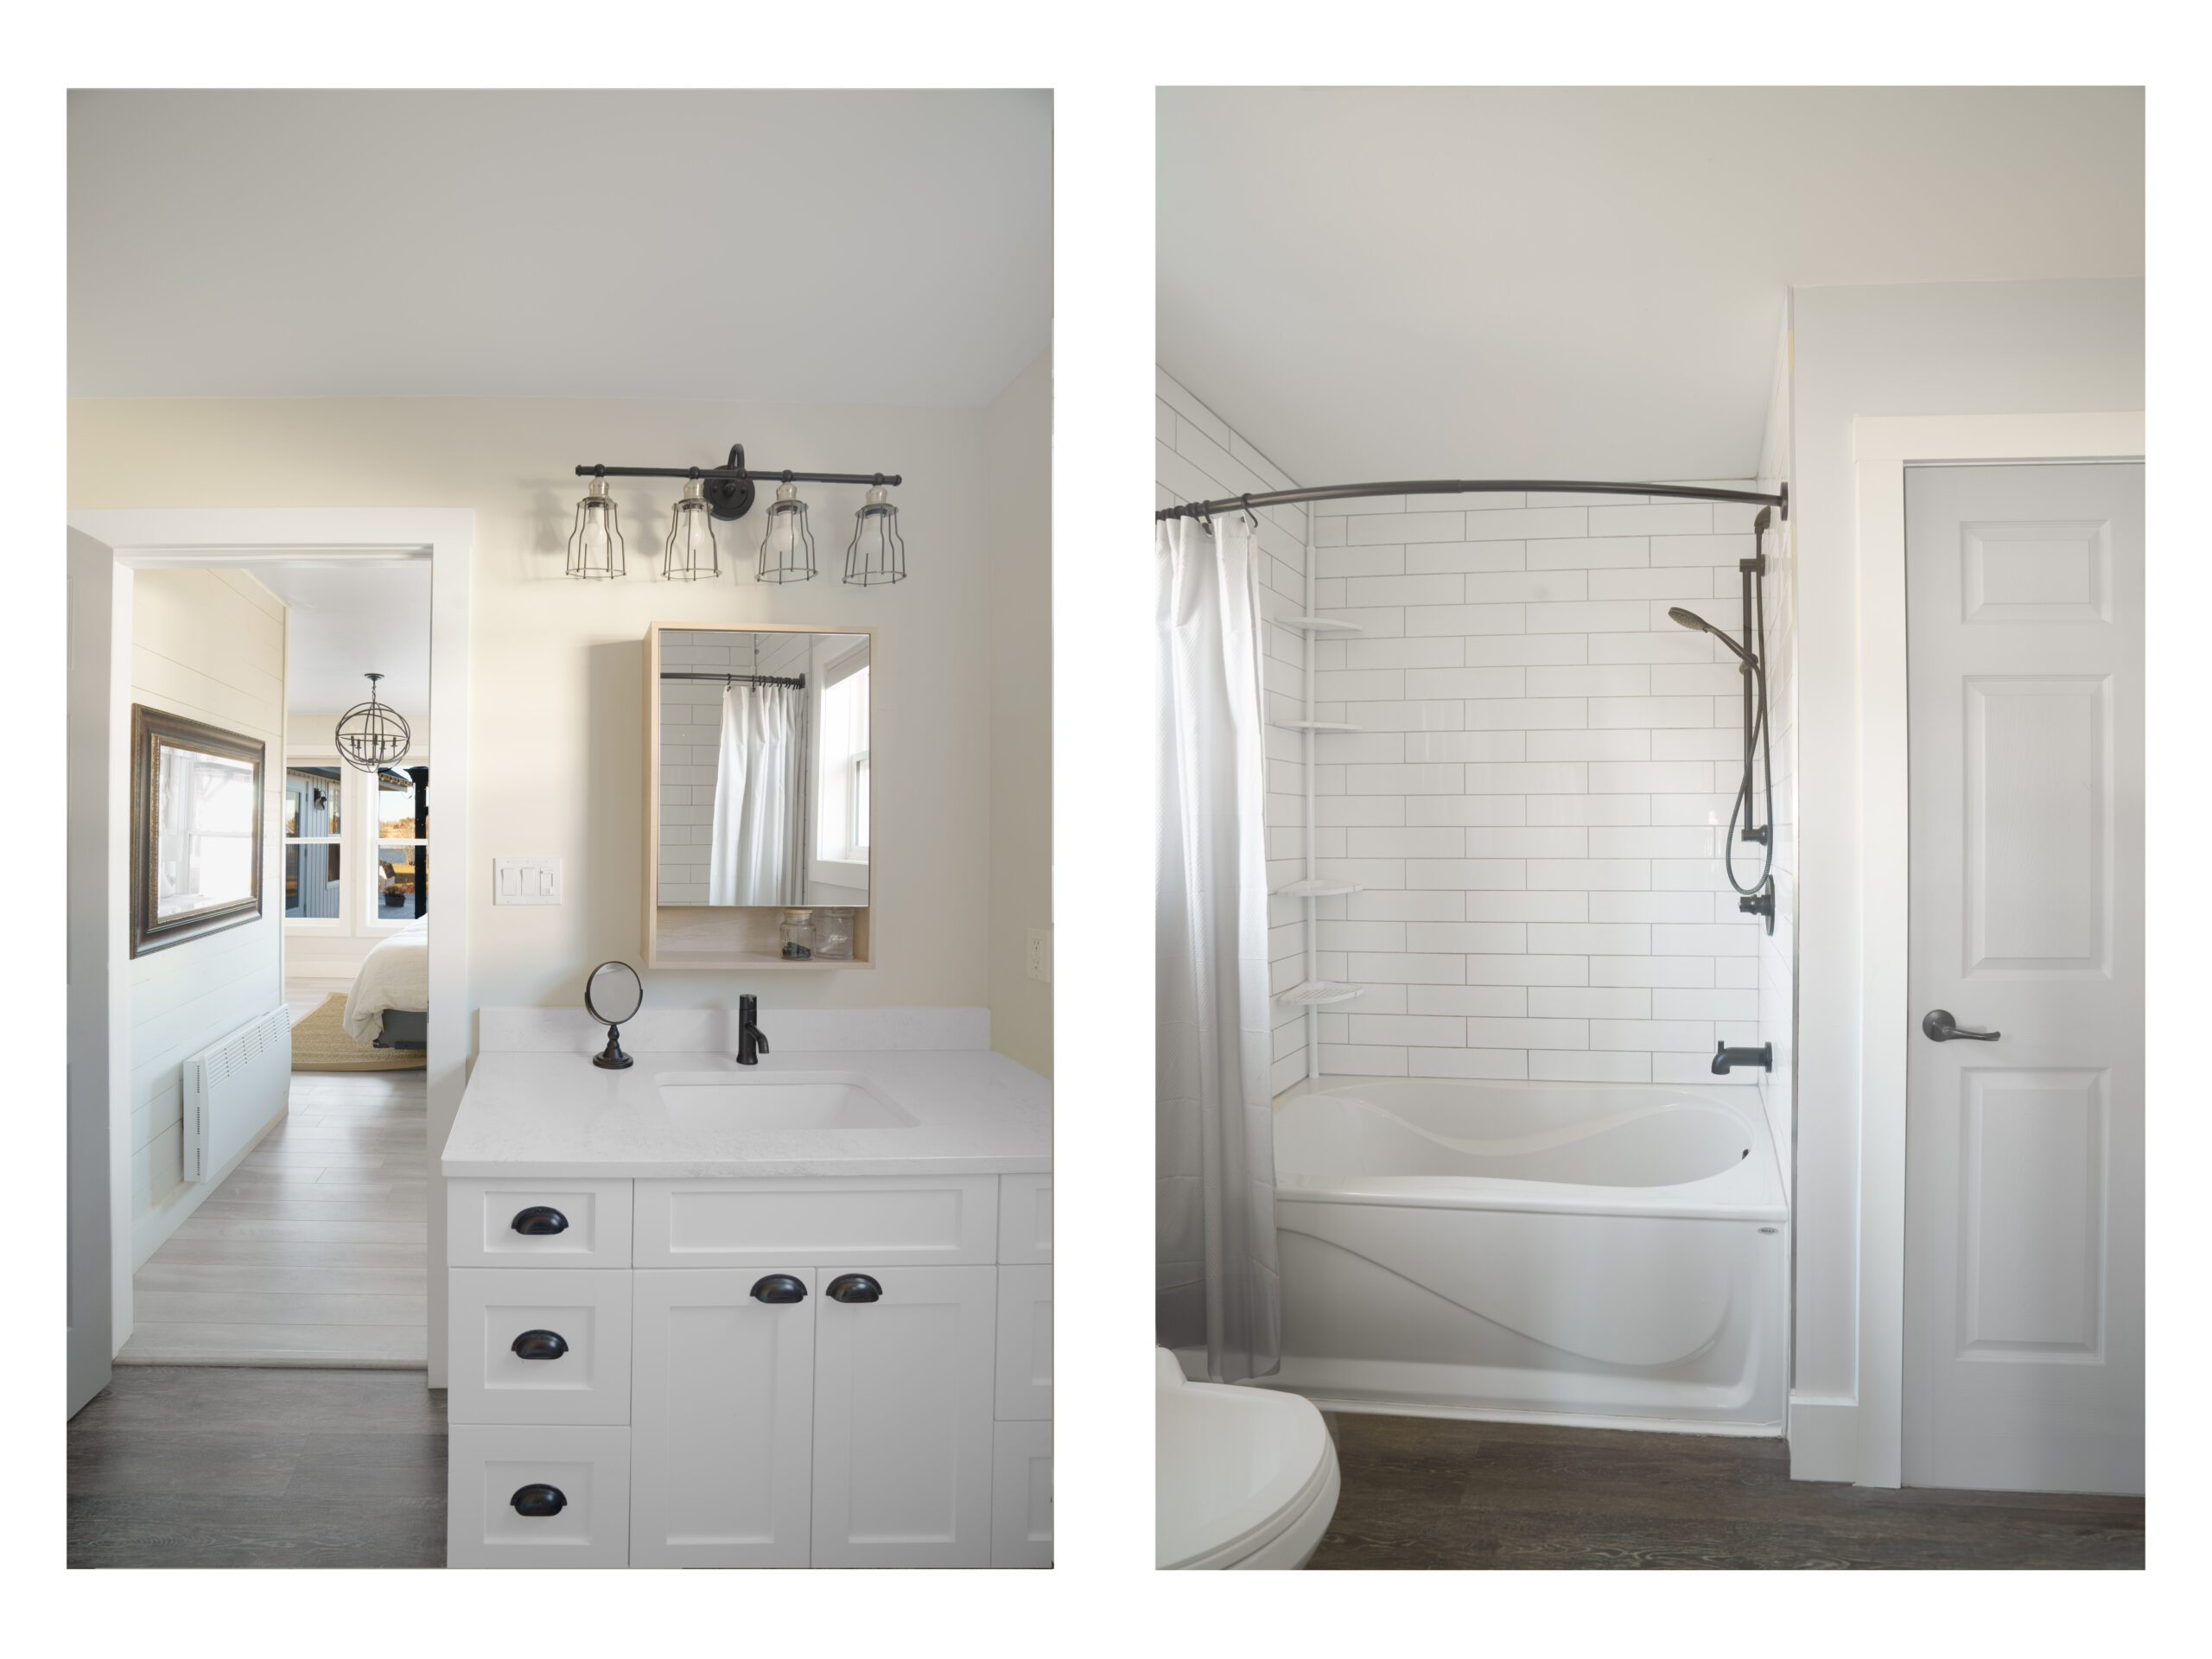 Two images showing different areas of the same bathroom, side by side. One image shows a sink with a mirror, and a doorframe leading to a bedroom. The other image shows a shower-bath combo and a toilet.